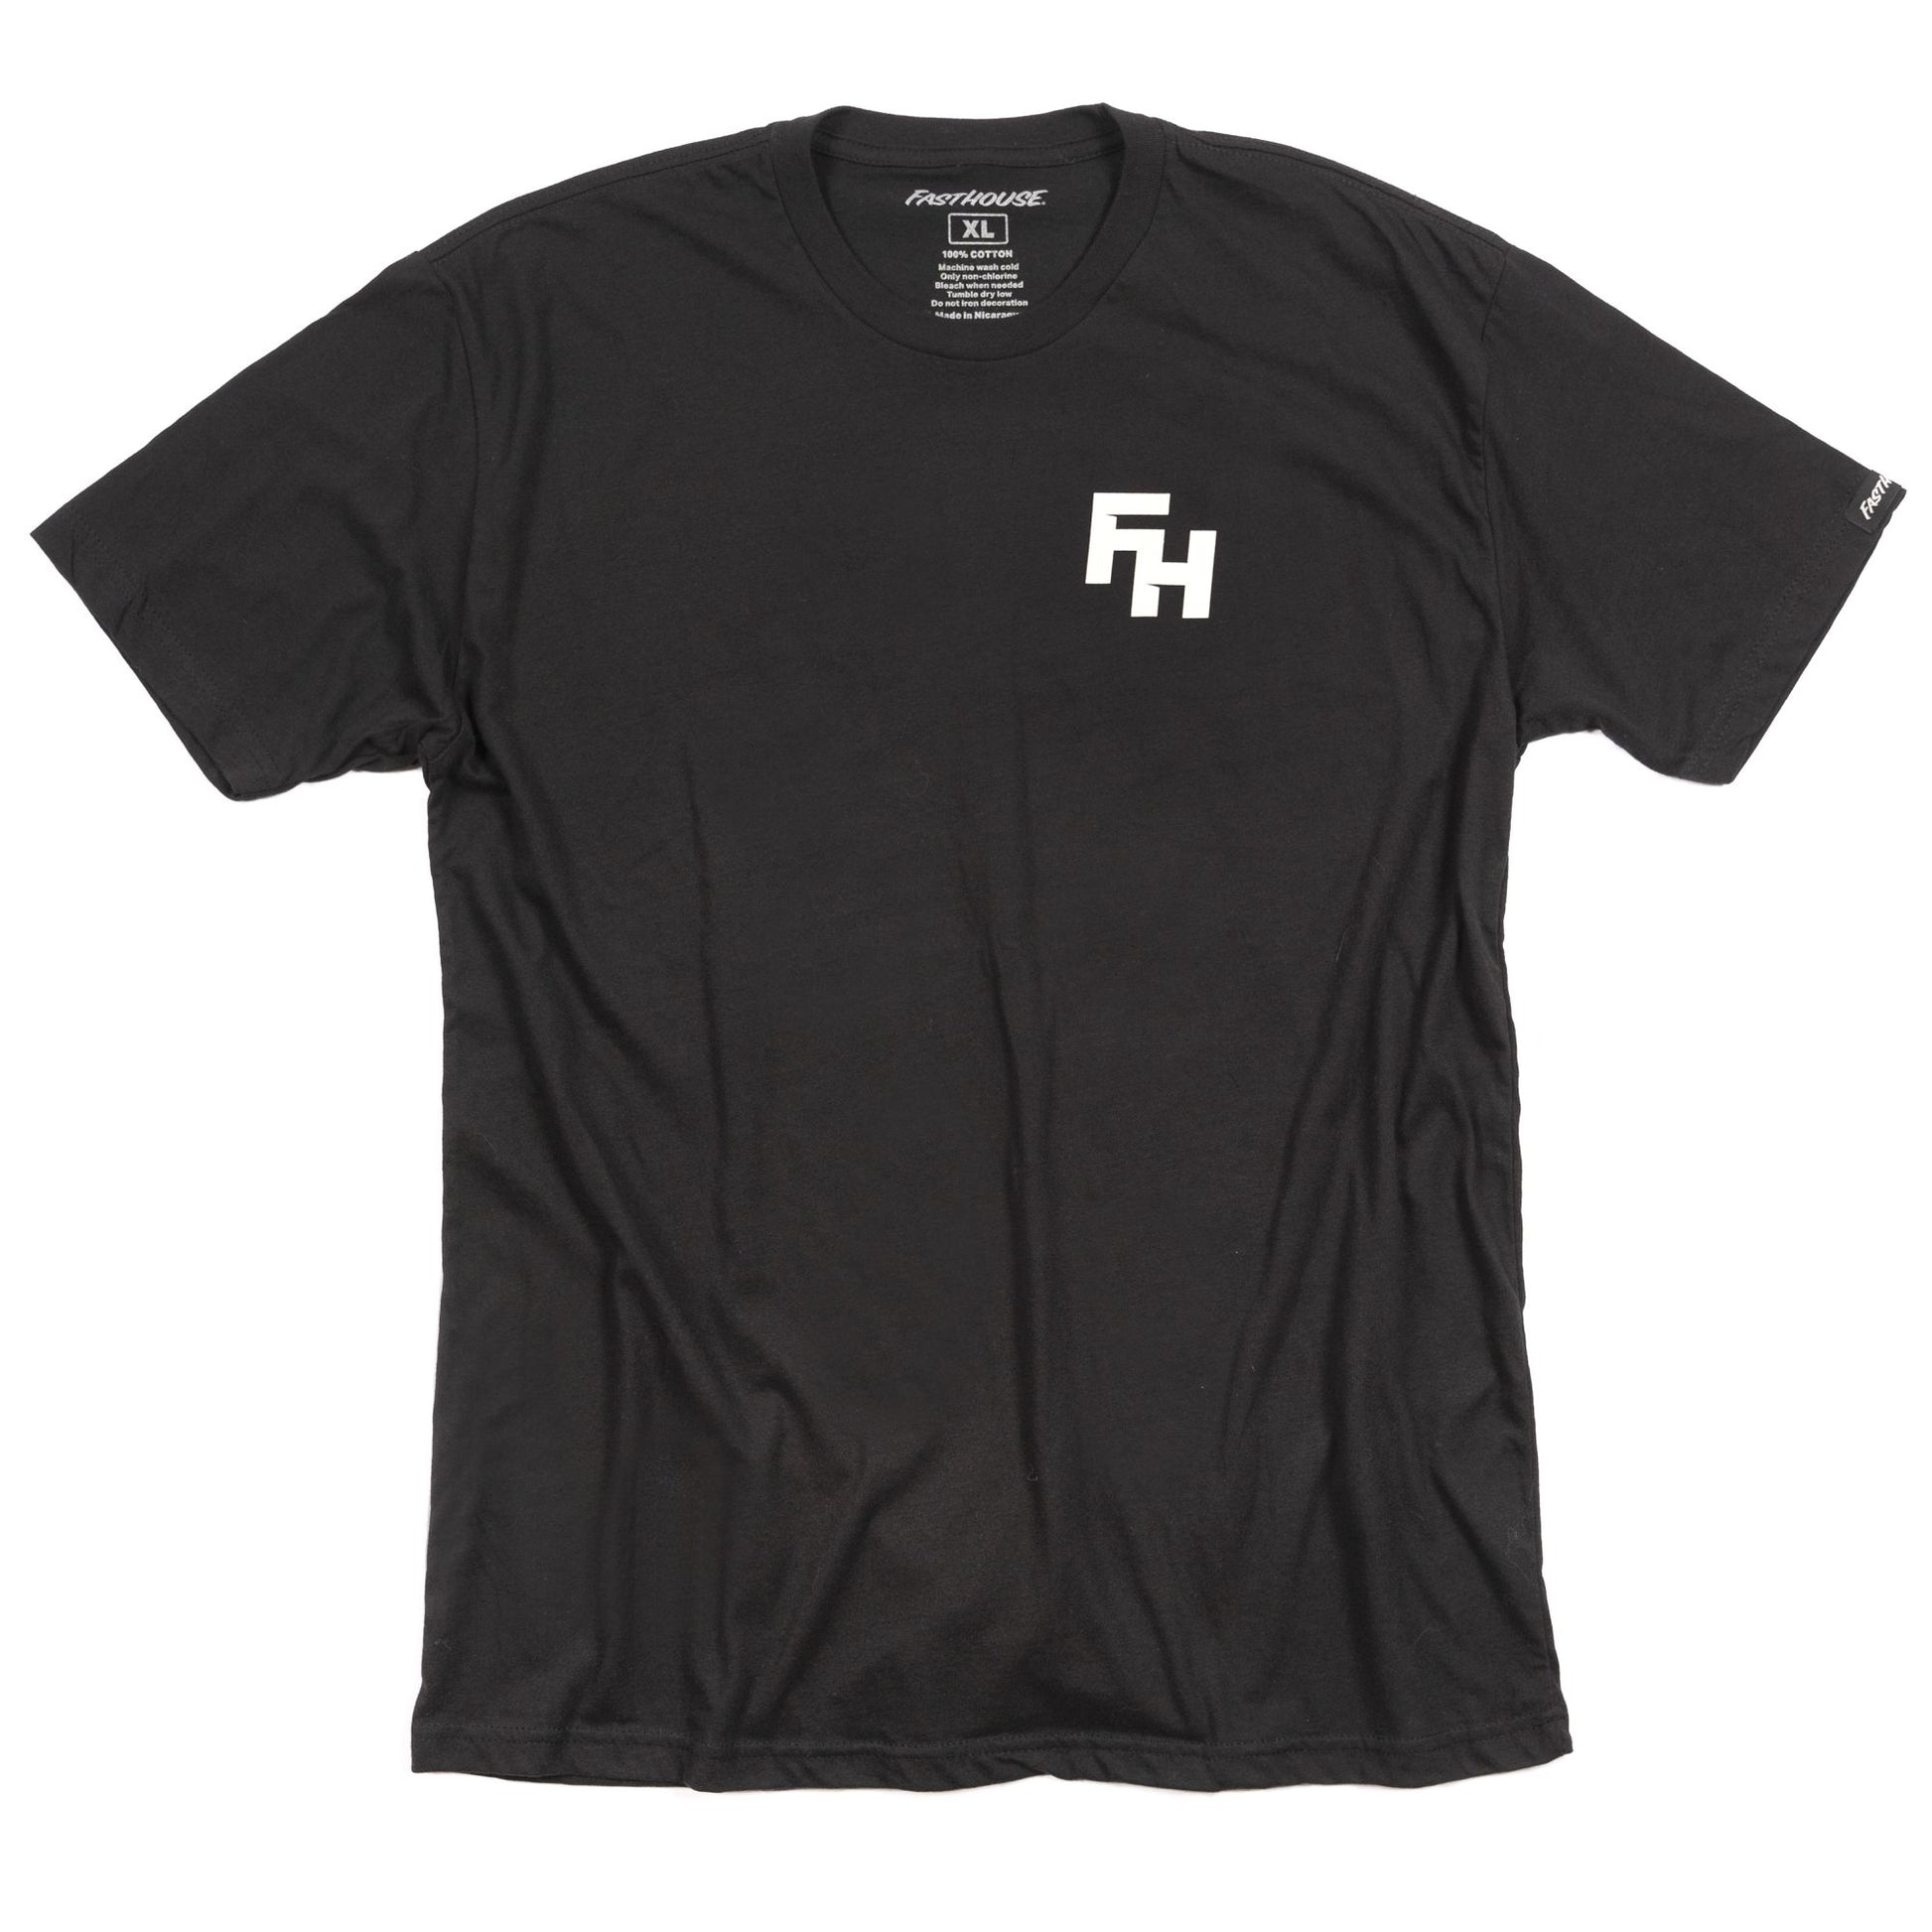 Fasthouse Sparq SS Tee Black M - Fasthouse SS Shirts